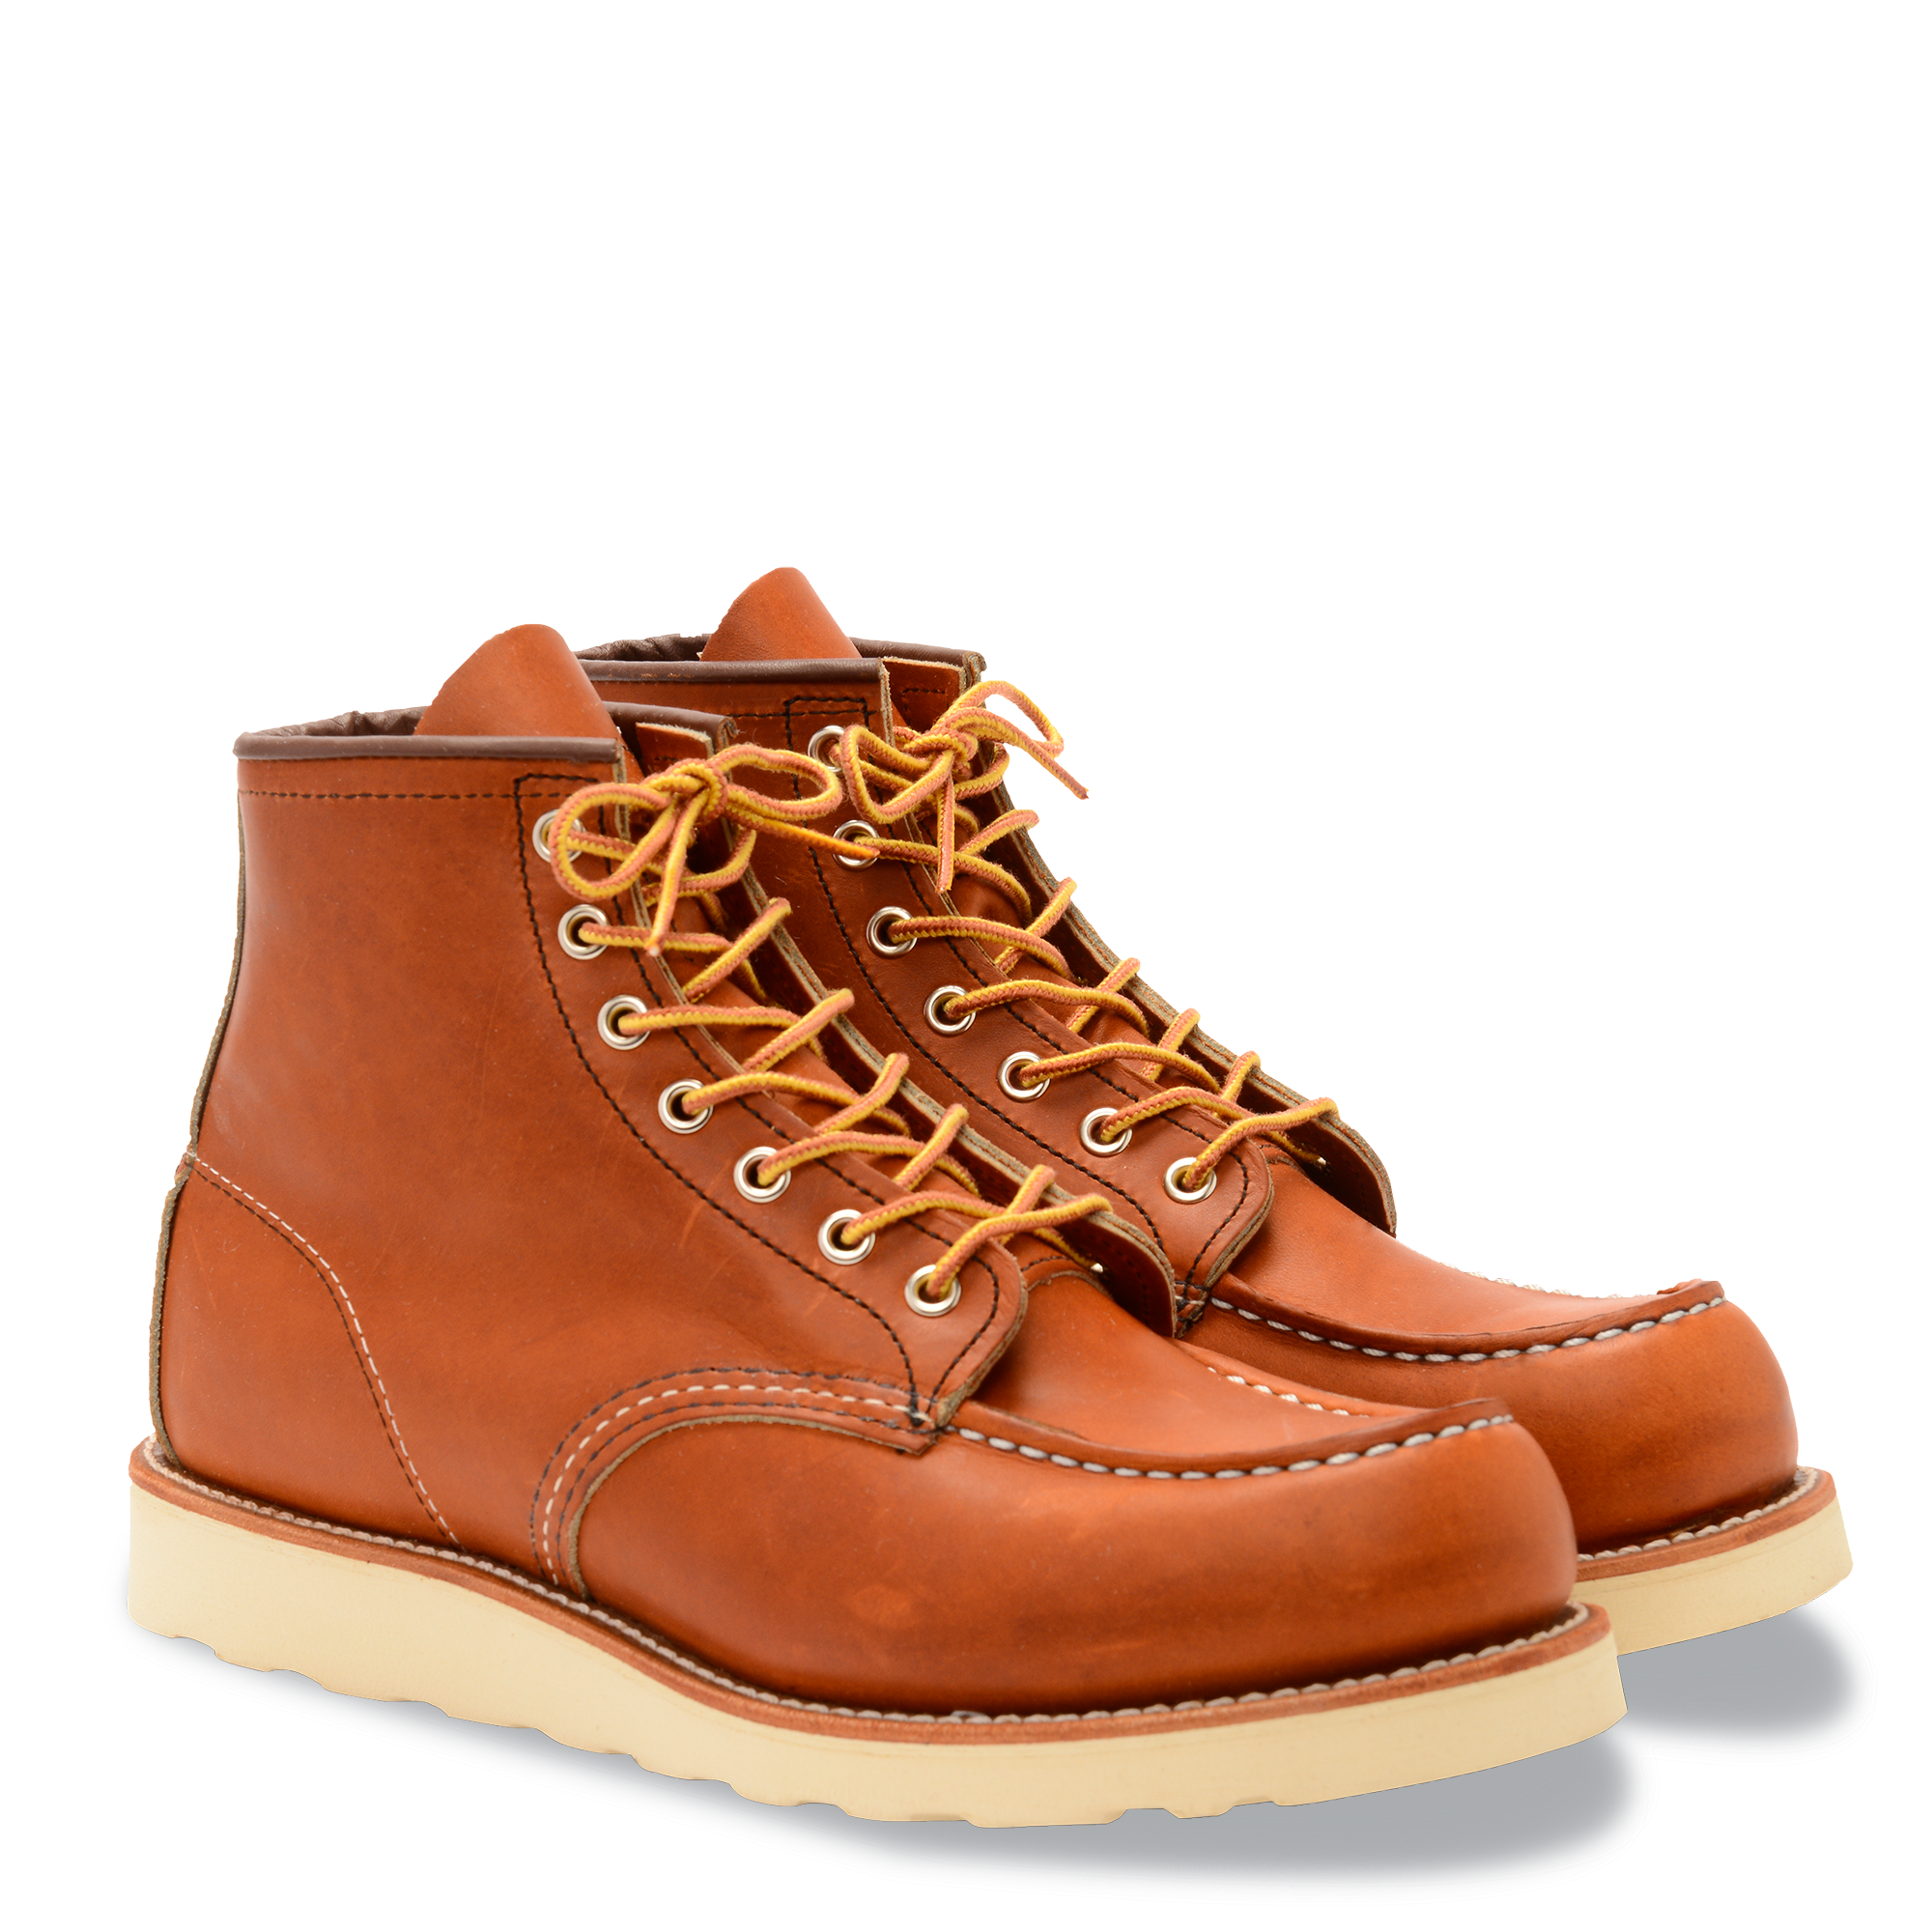 Red Wing Classic Moc Toe Boots    Red Wing London London